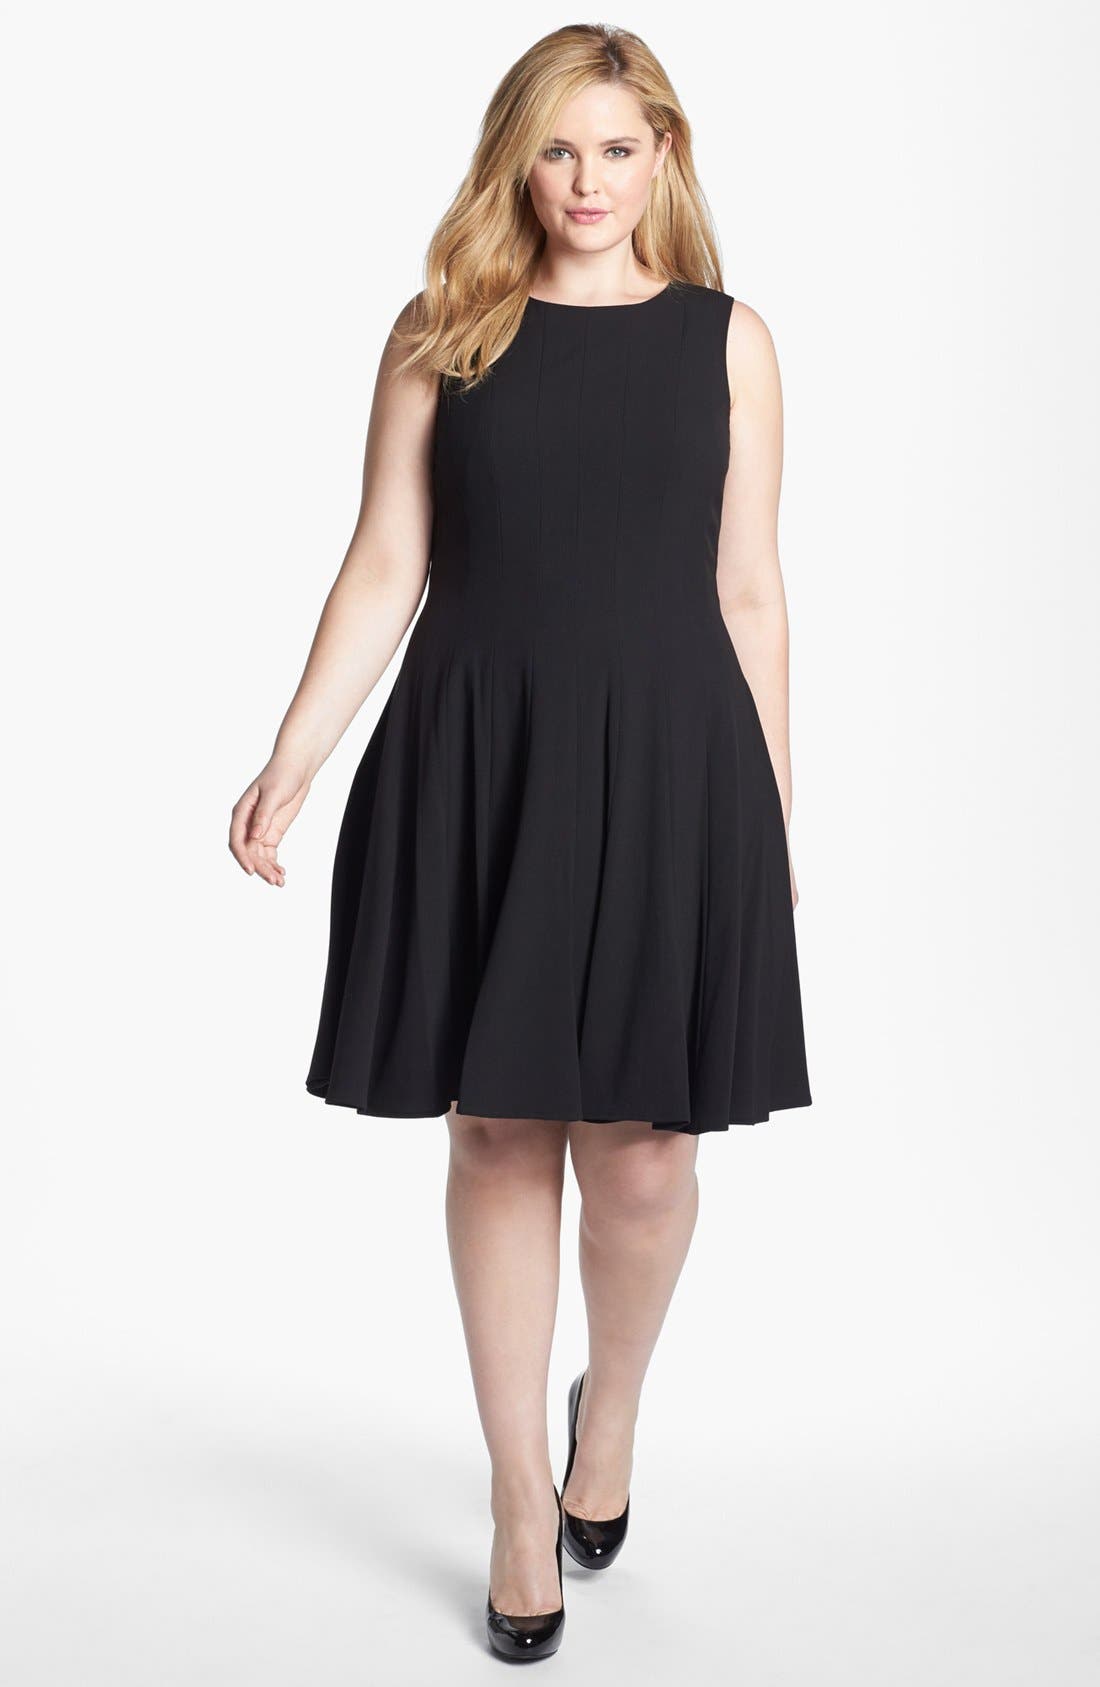 black sleeveless fit and flare dress